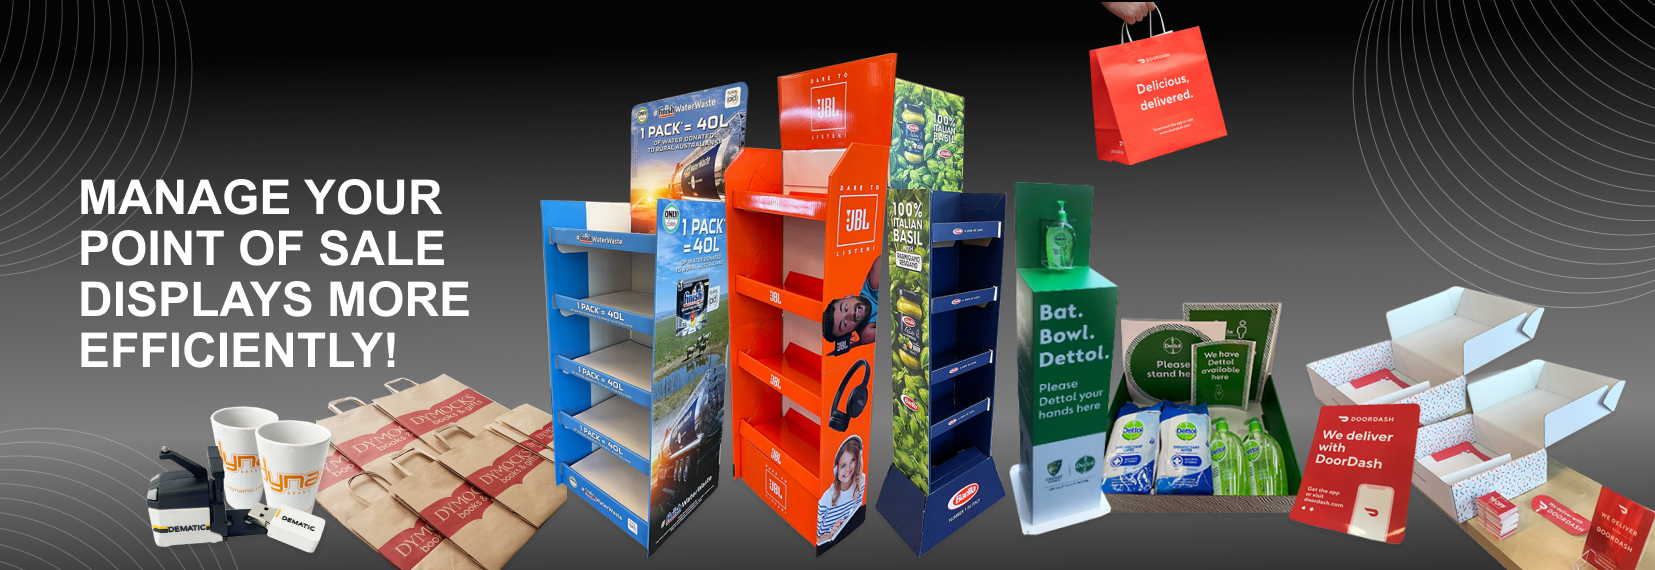 Manage your Point Of Sale displays more efficiently!